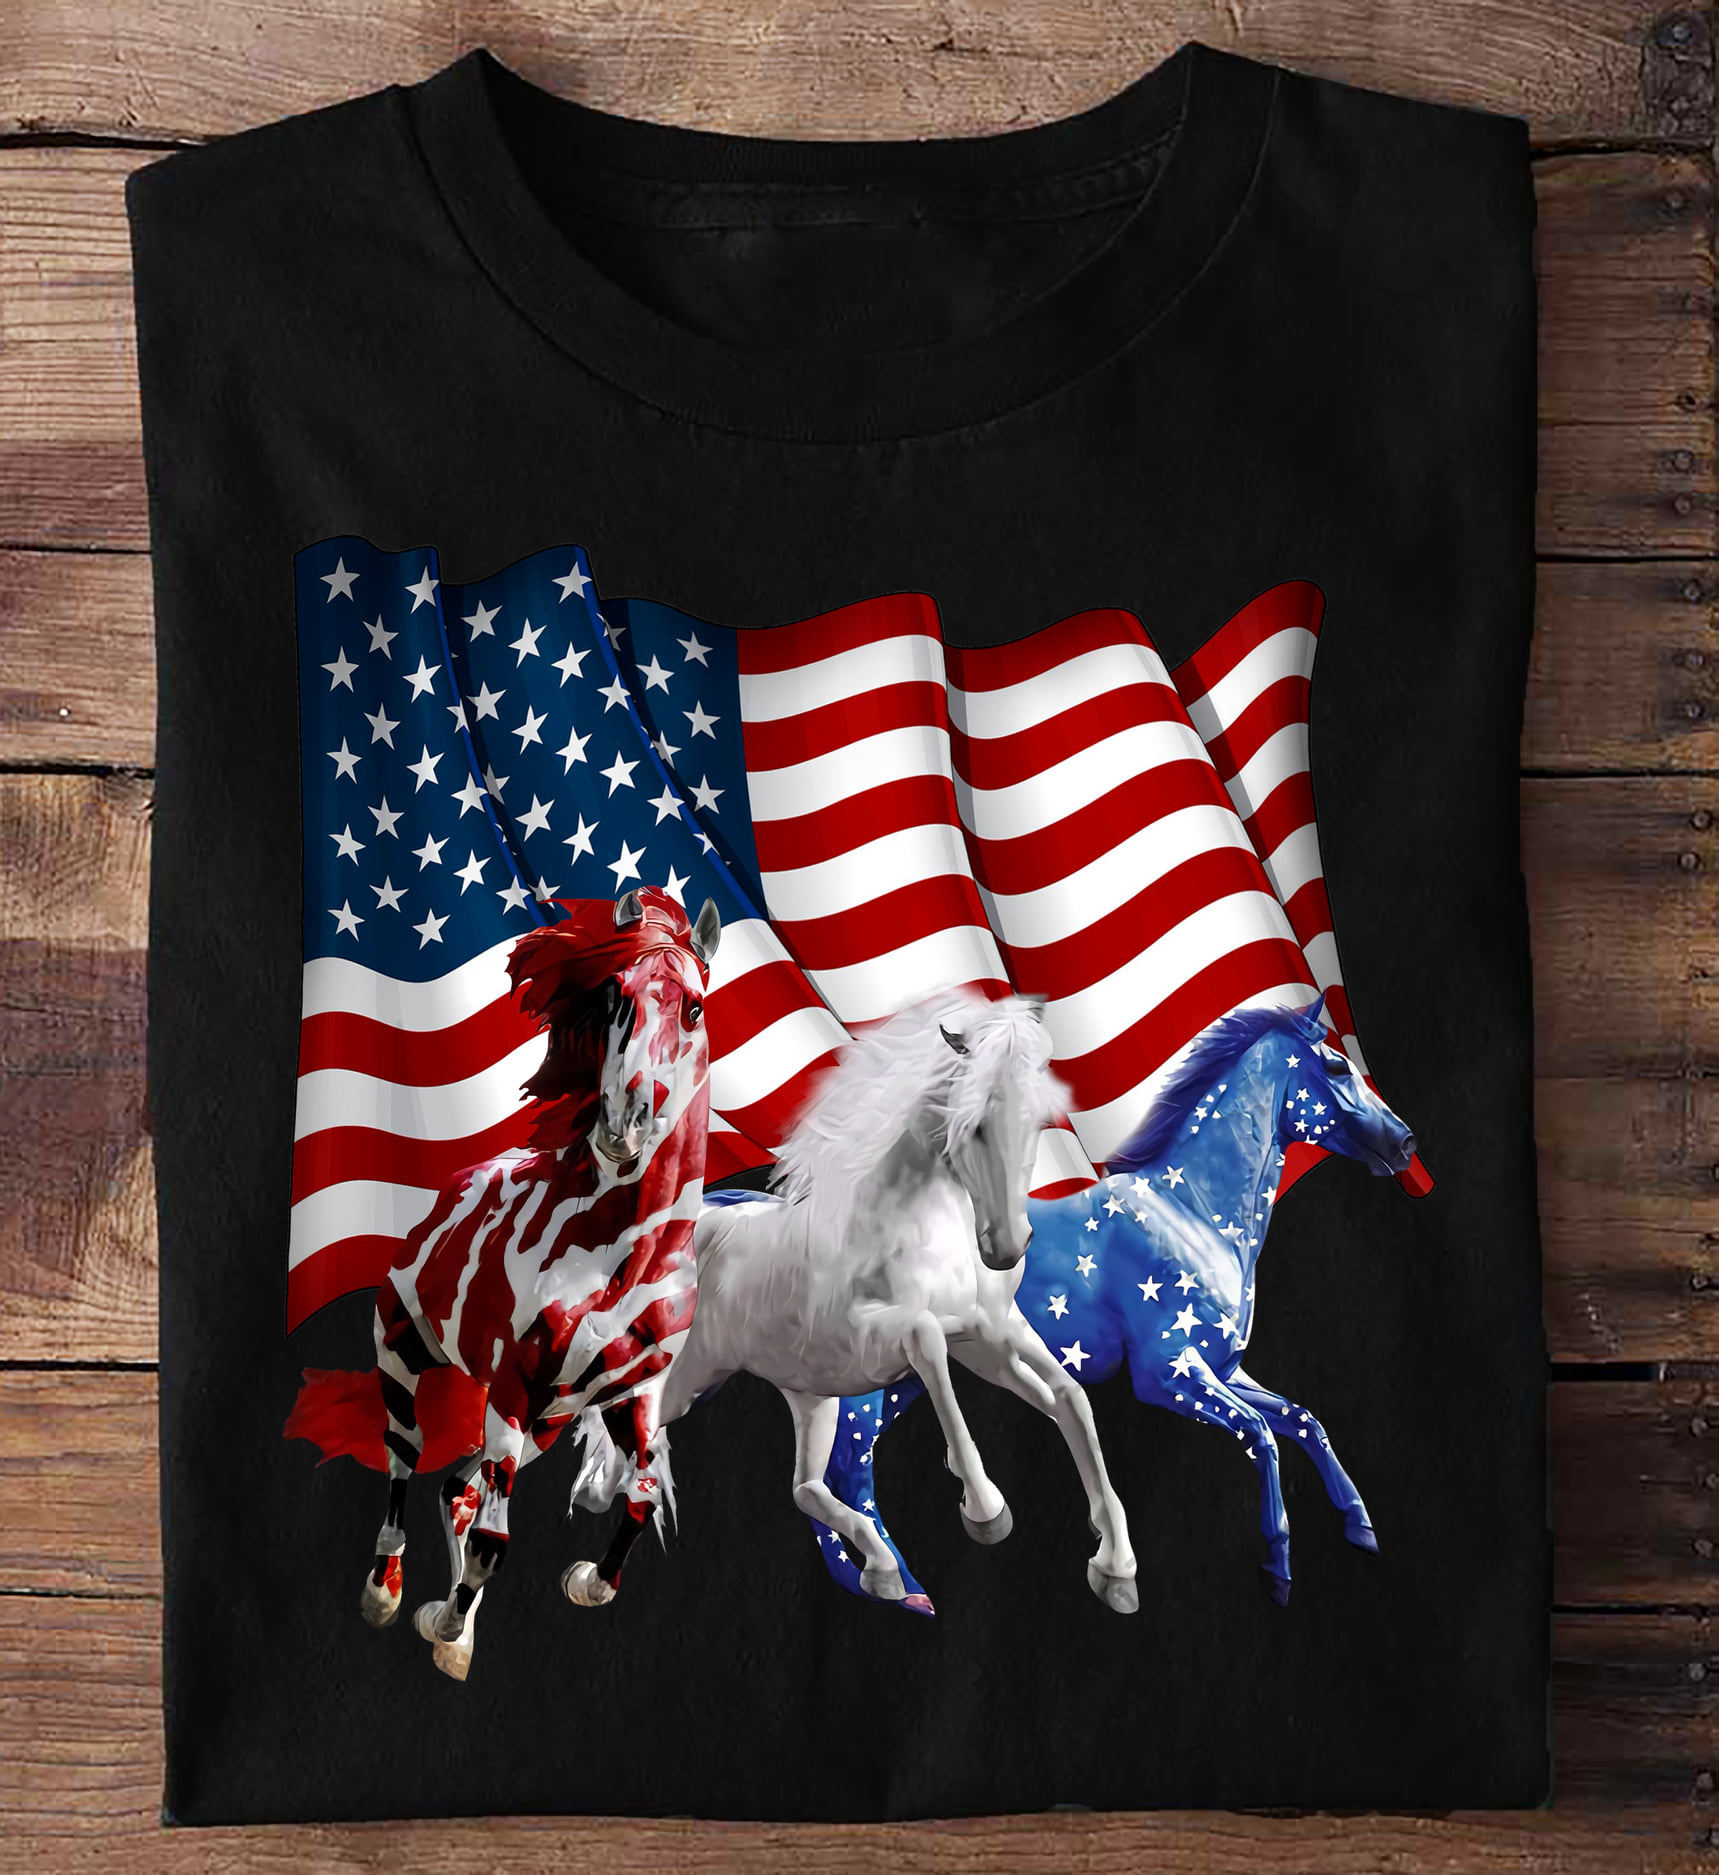 America flag and horse - Horse lover